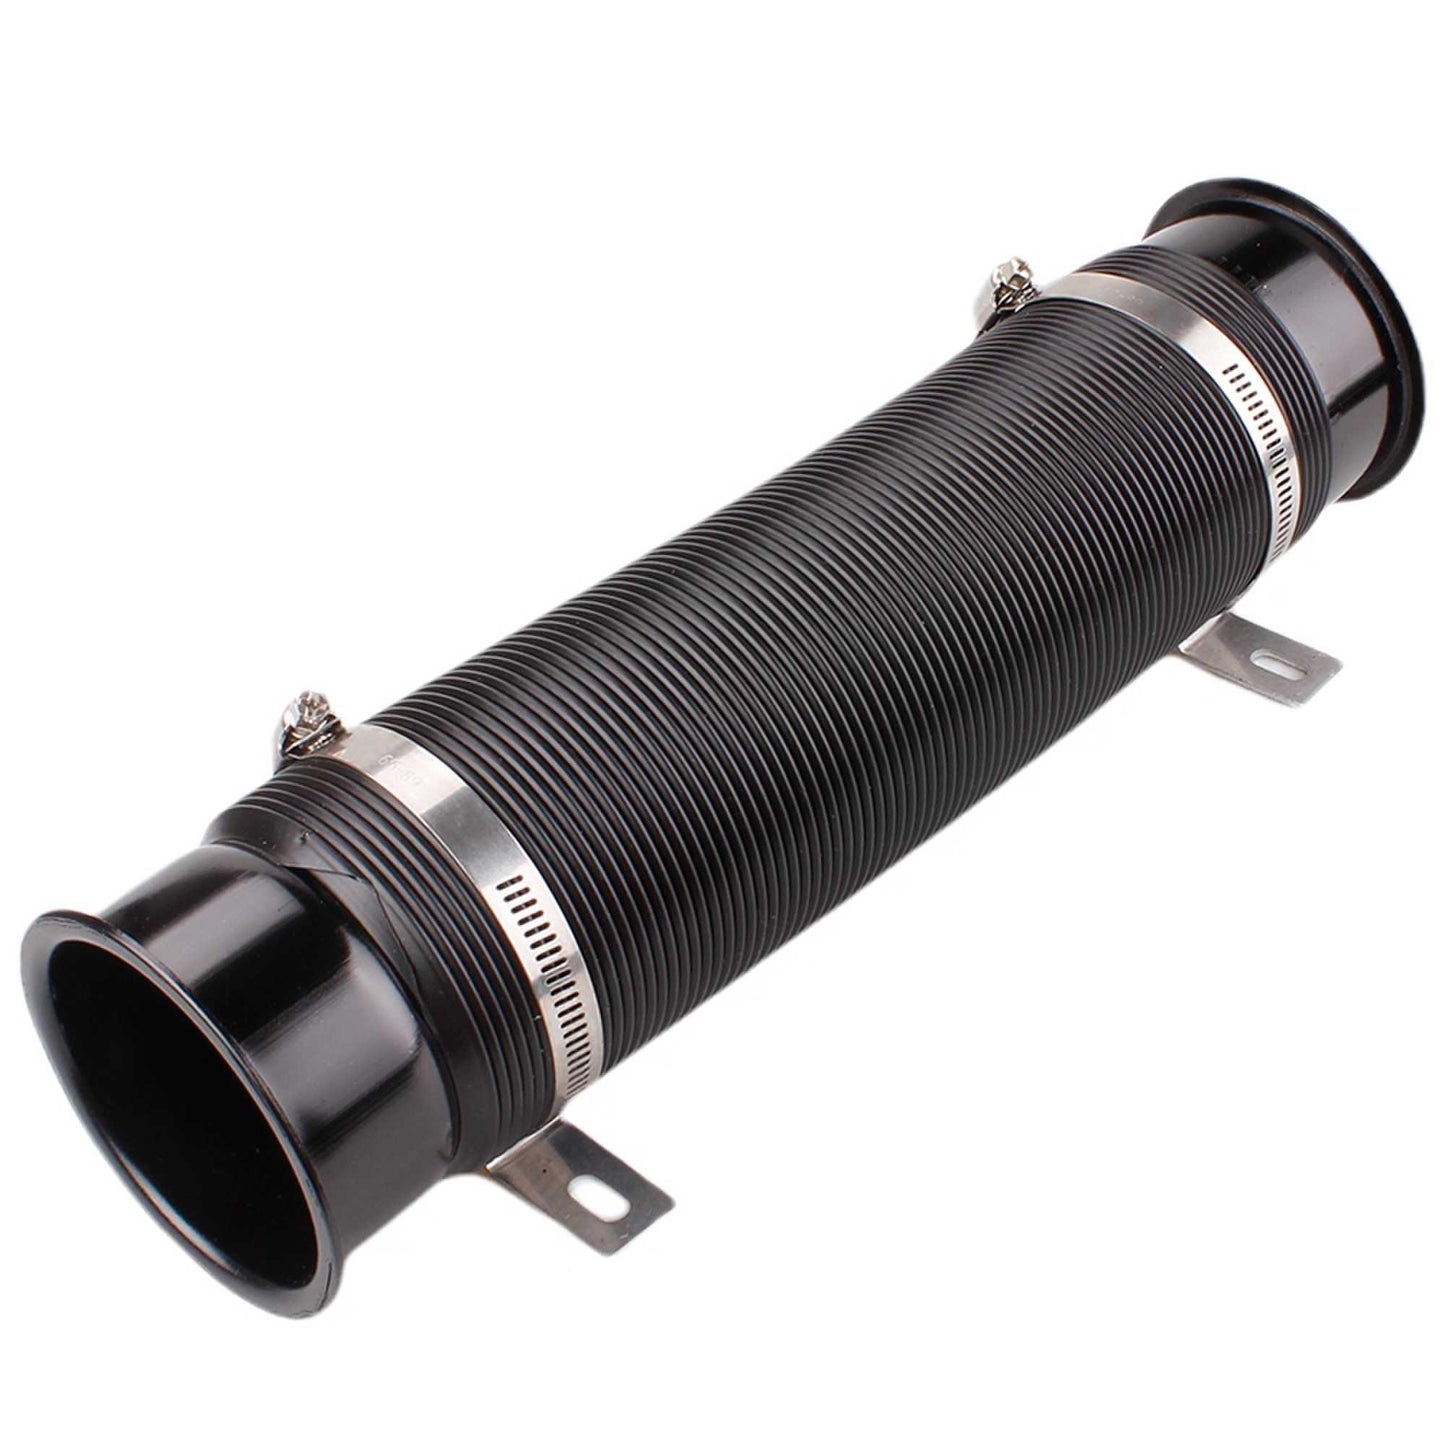 RASTP Universal 76mm Car Cold Air Turbo Intake Inlet Pipe Adjustable Flexible Duct Tube Hose Cold Feed Duct Pipe - RASTP